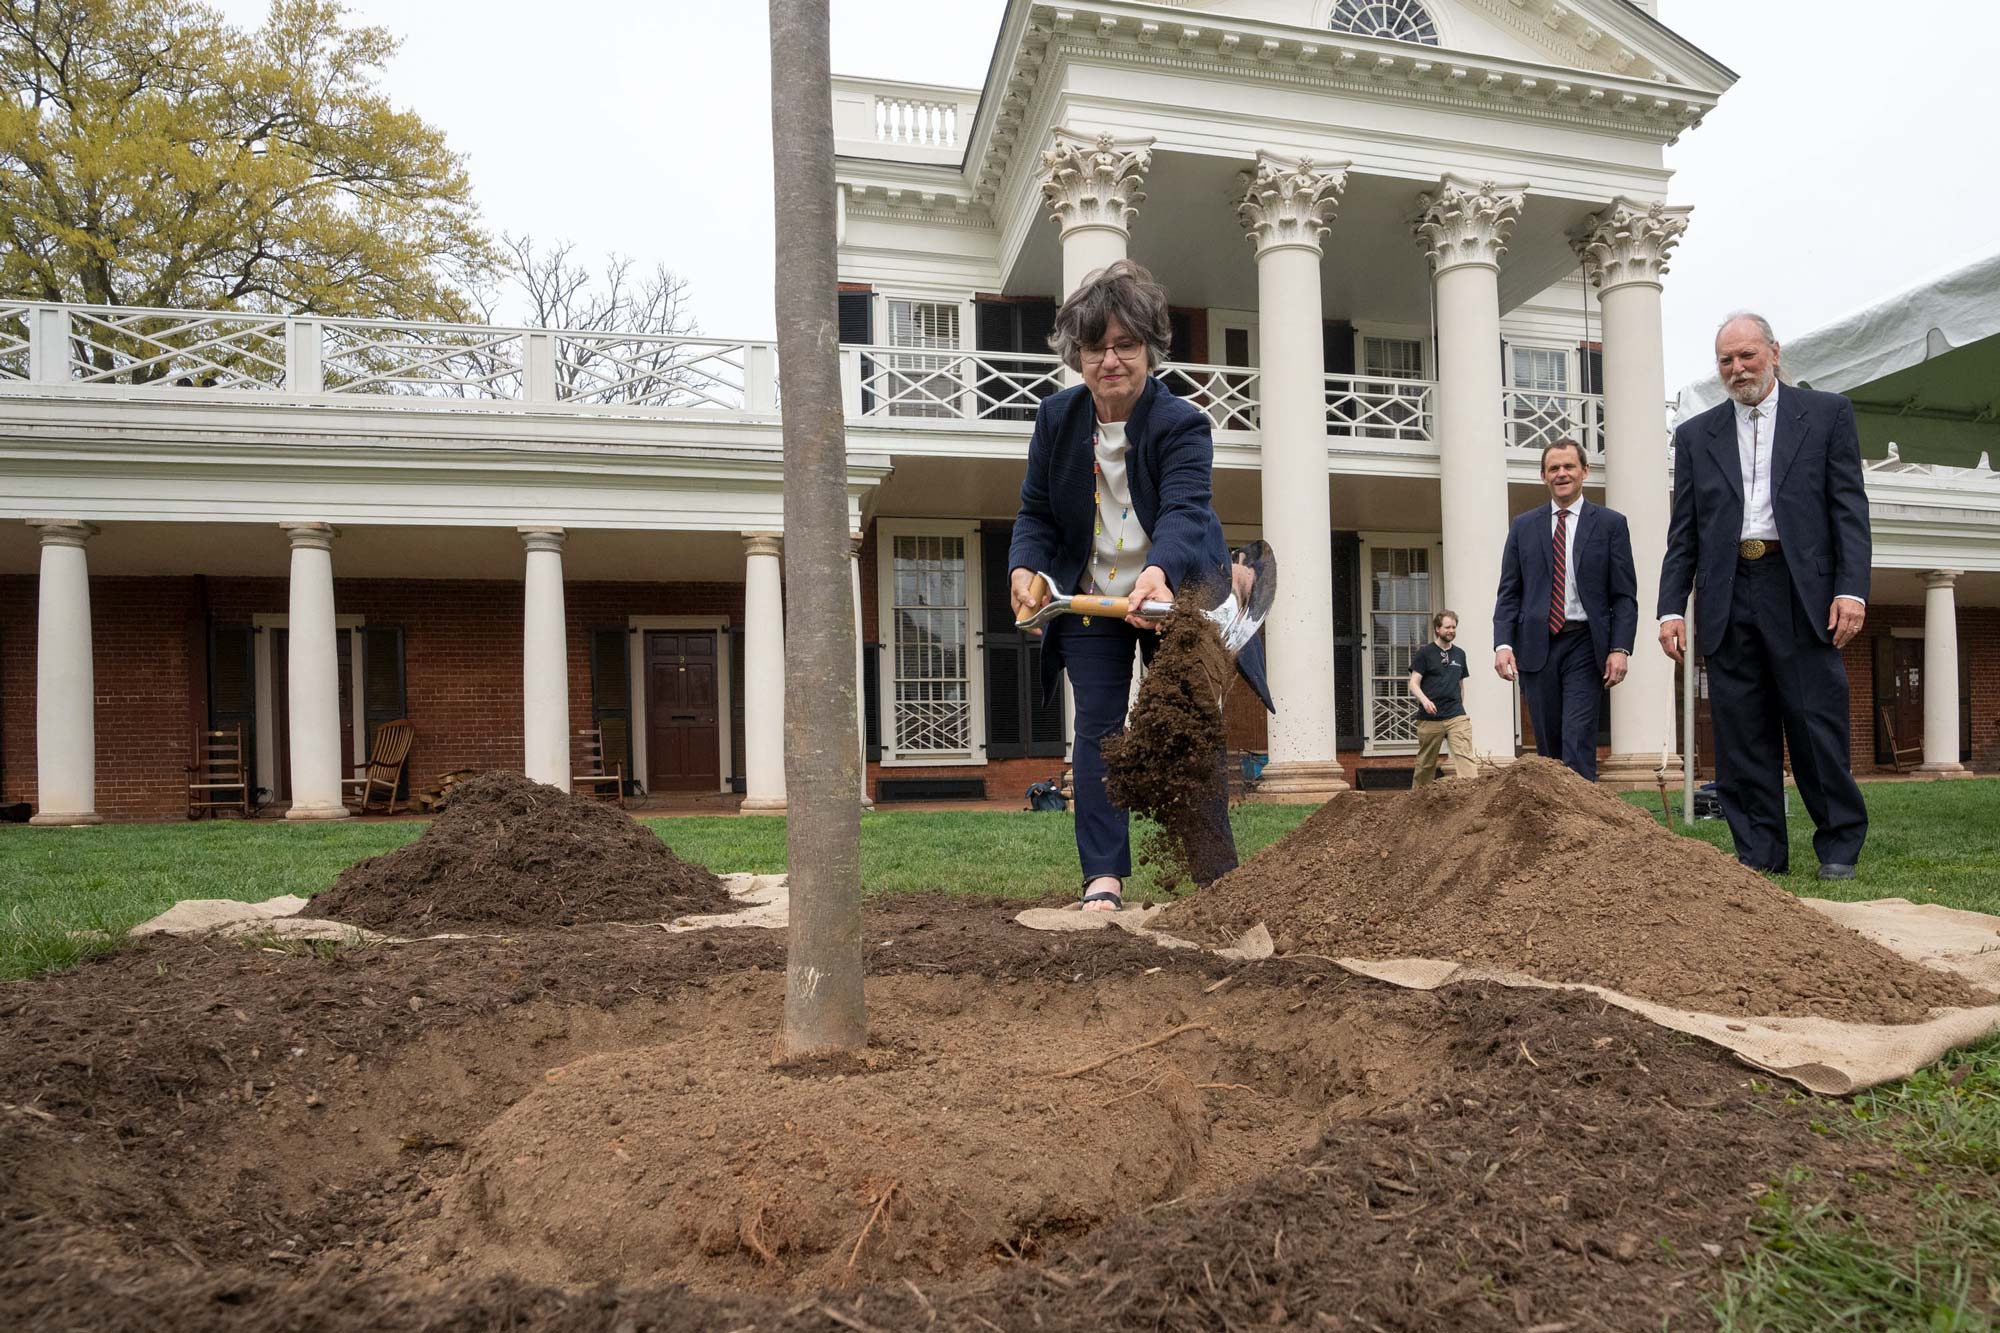 Mary Hughes shovels a pile of soil into a planting hole. Worthy Martin and UVA President Jim Ryan look on.